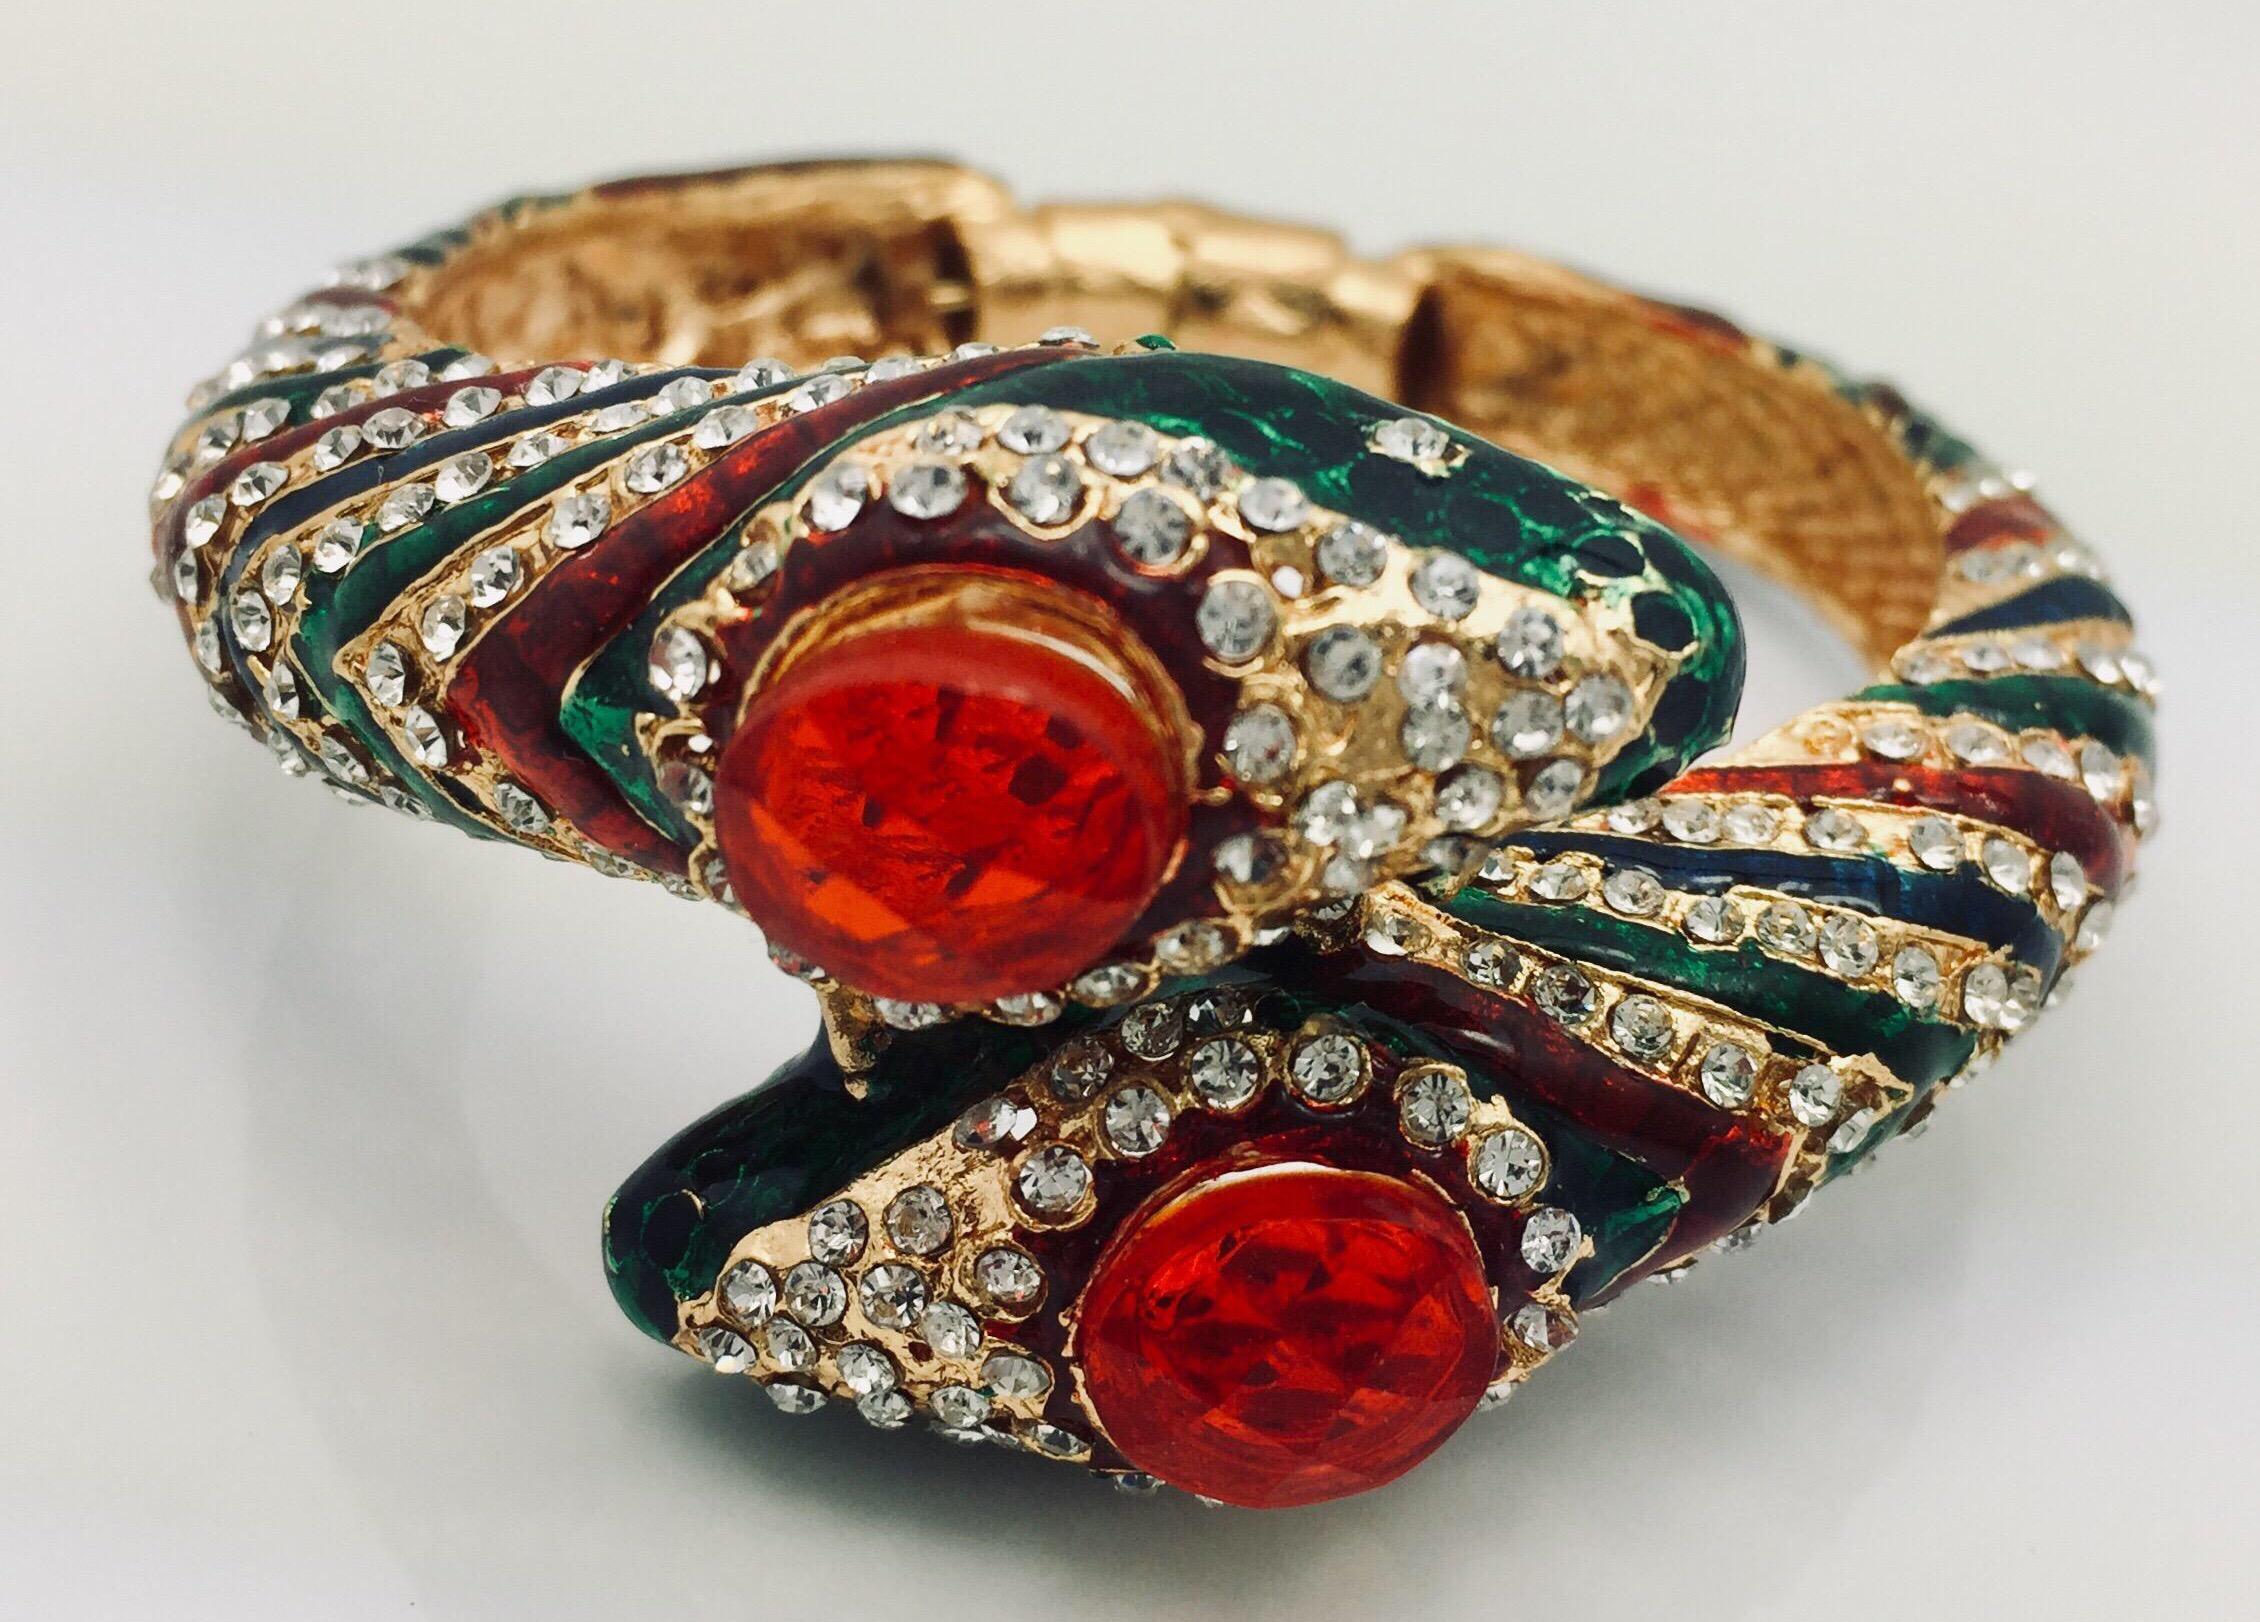 Stunning wrap around snake hinged bangle bracelet is encrusted with sparkling cubic zircon and detailed with bold rich green, red and blue enamel.

Approx: 1.13